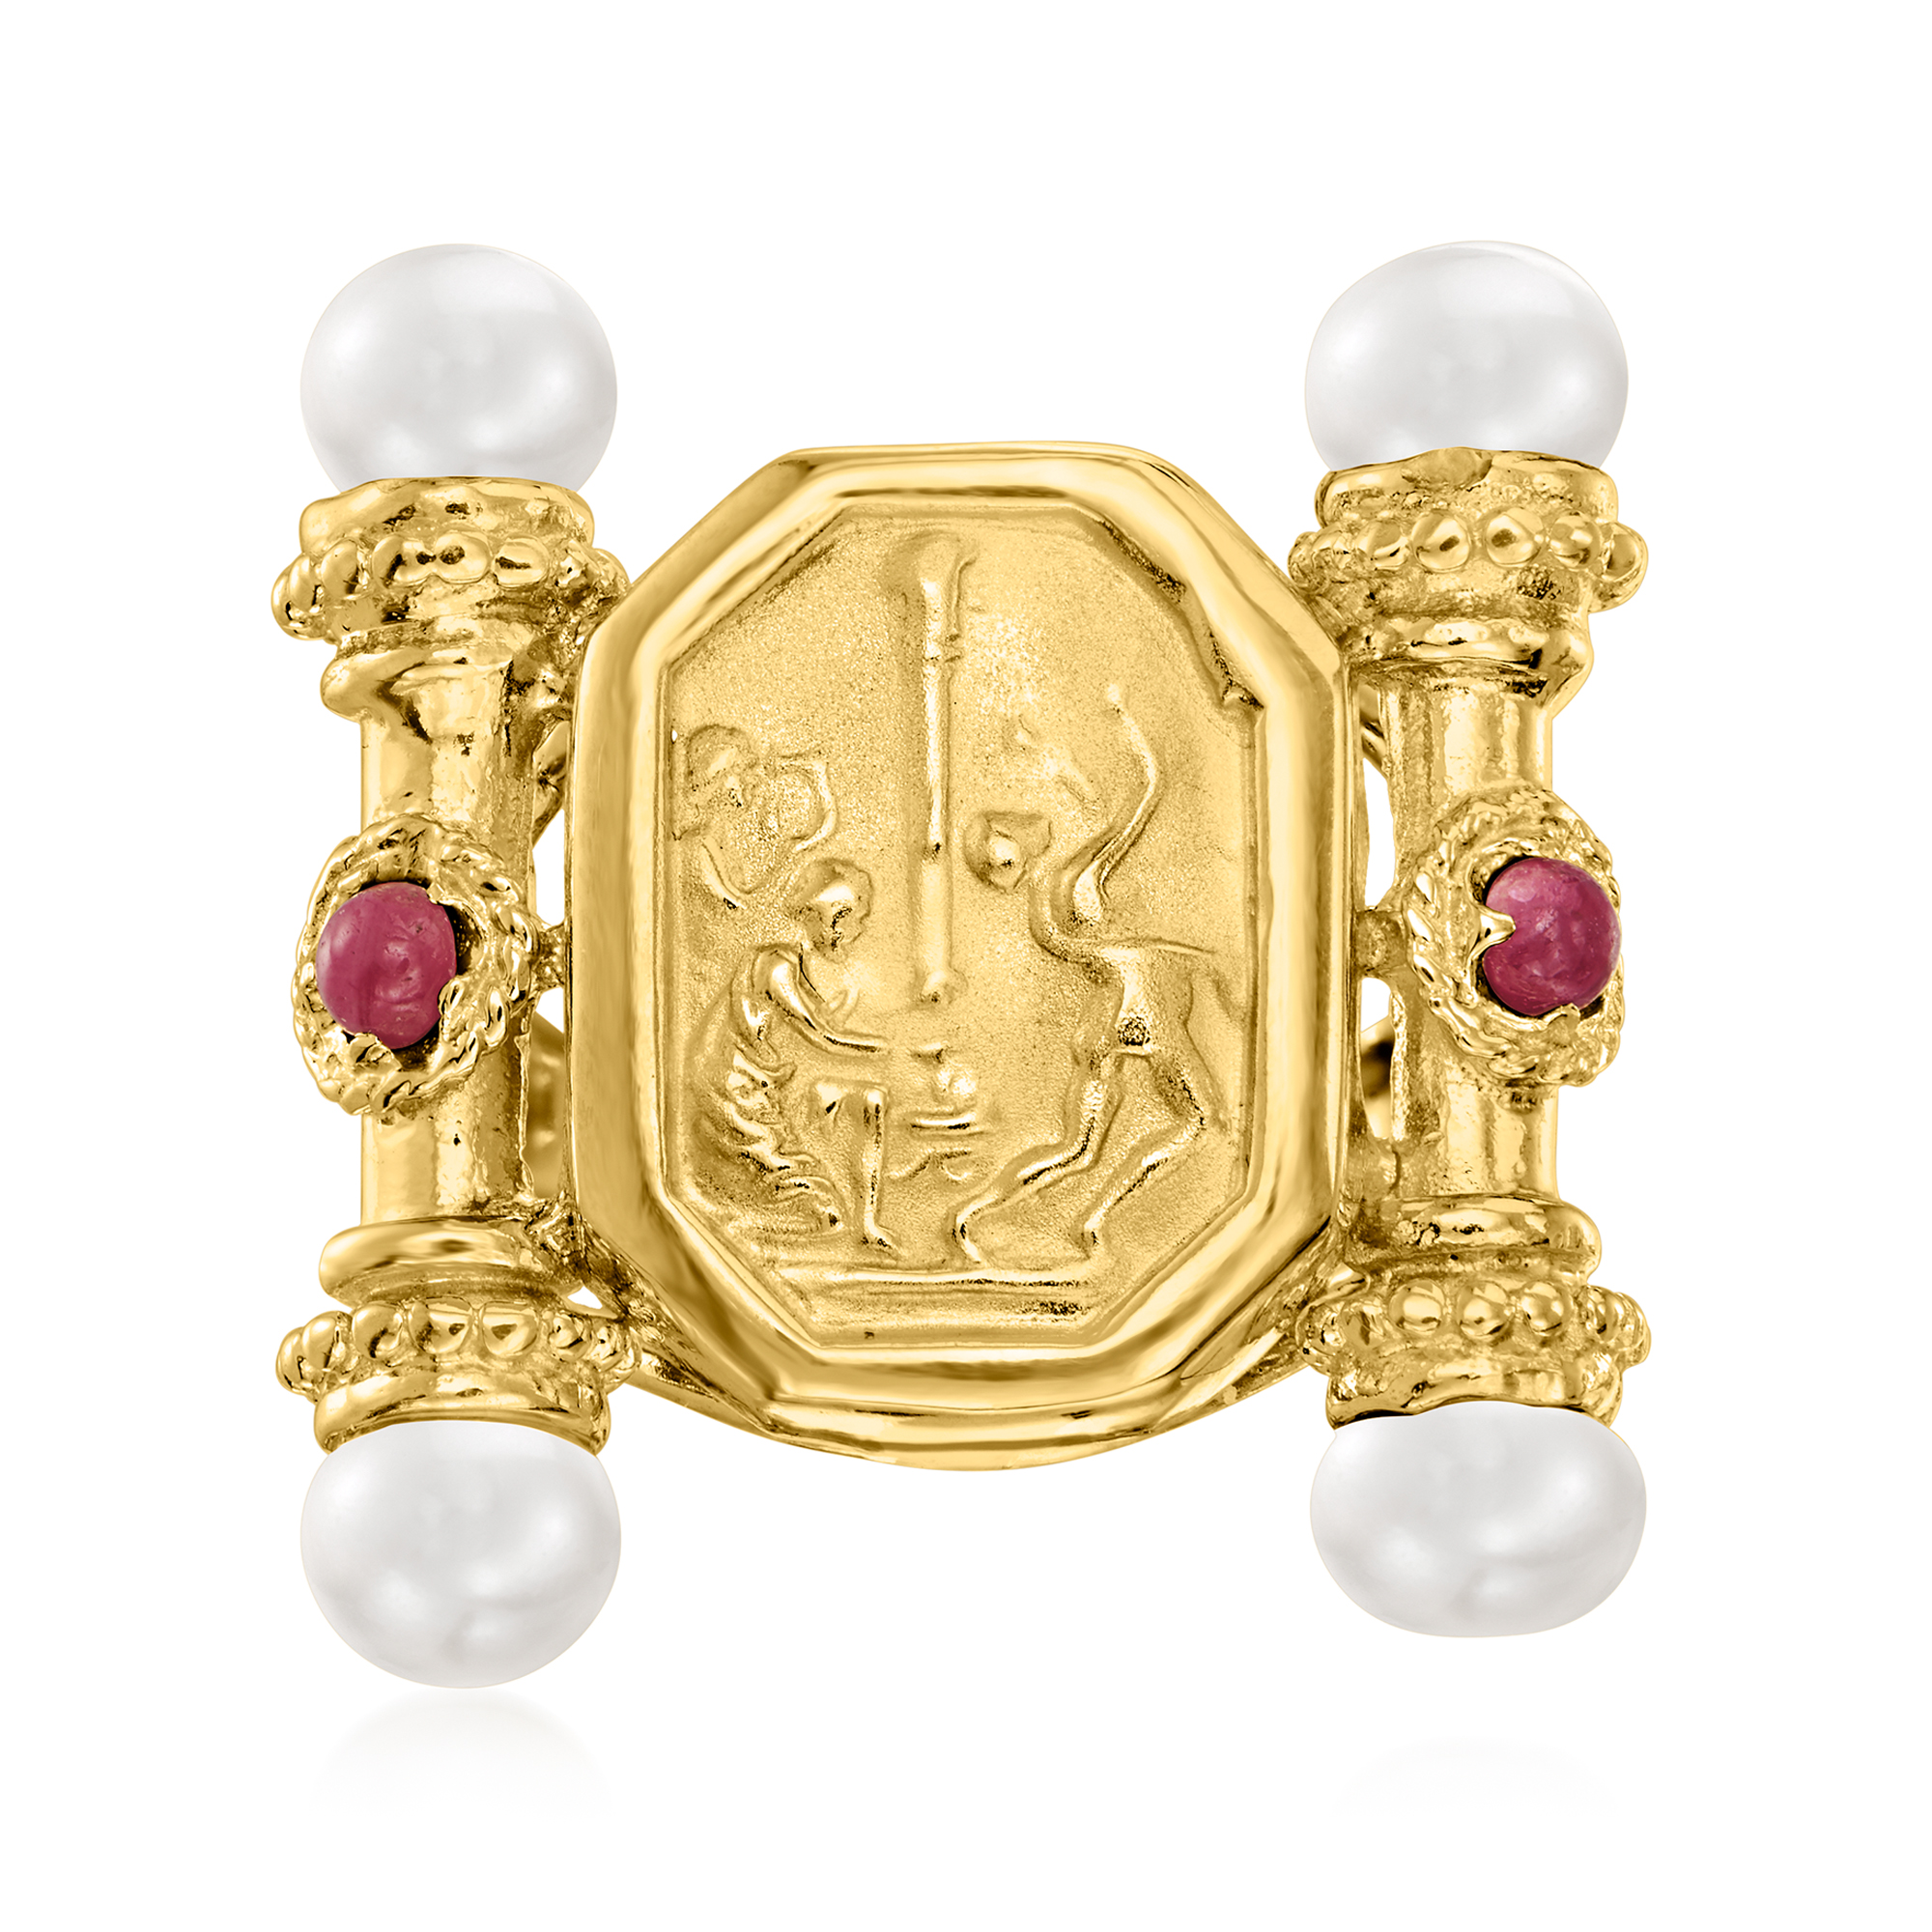 Italian Tagliamonte 5-5.5mm Cultured Pearl and .40 ct. t.w. Ruby Cameo-Style  Ring in 18kt Gold Over Sterling | Ross-Simons